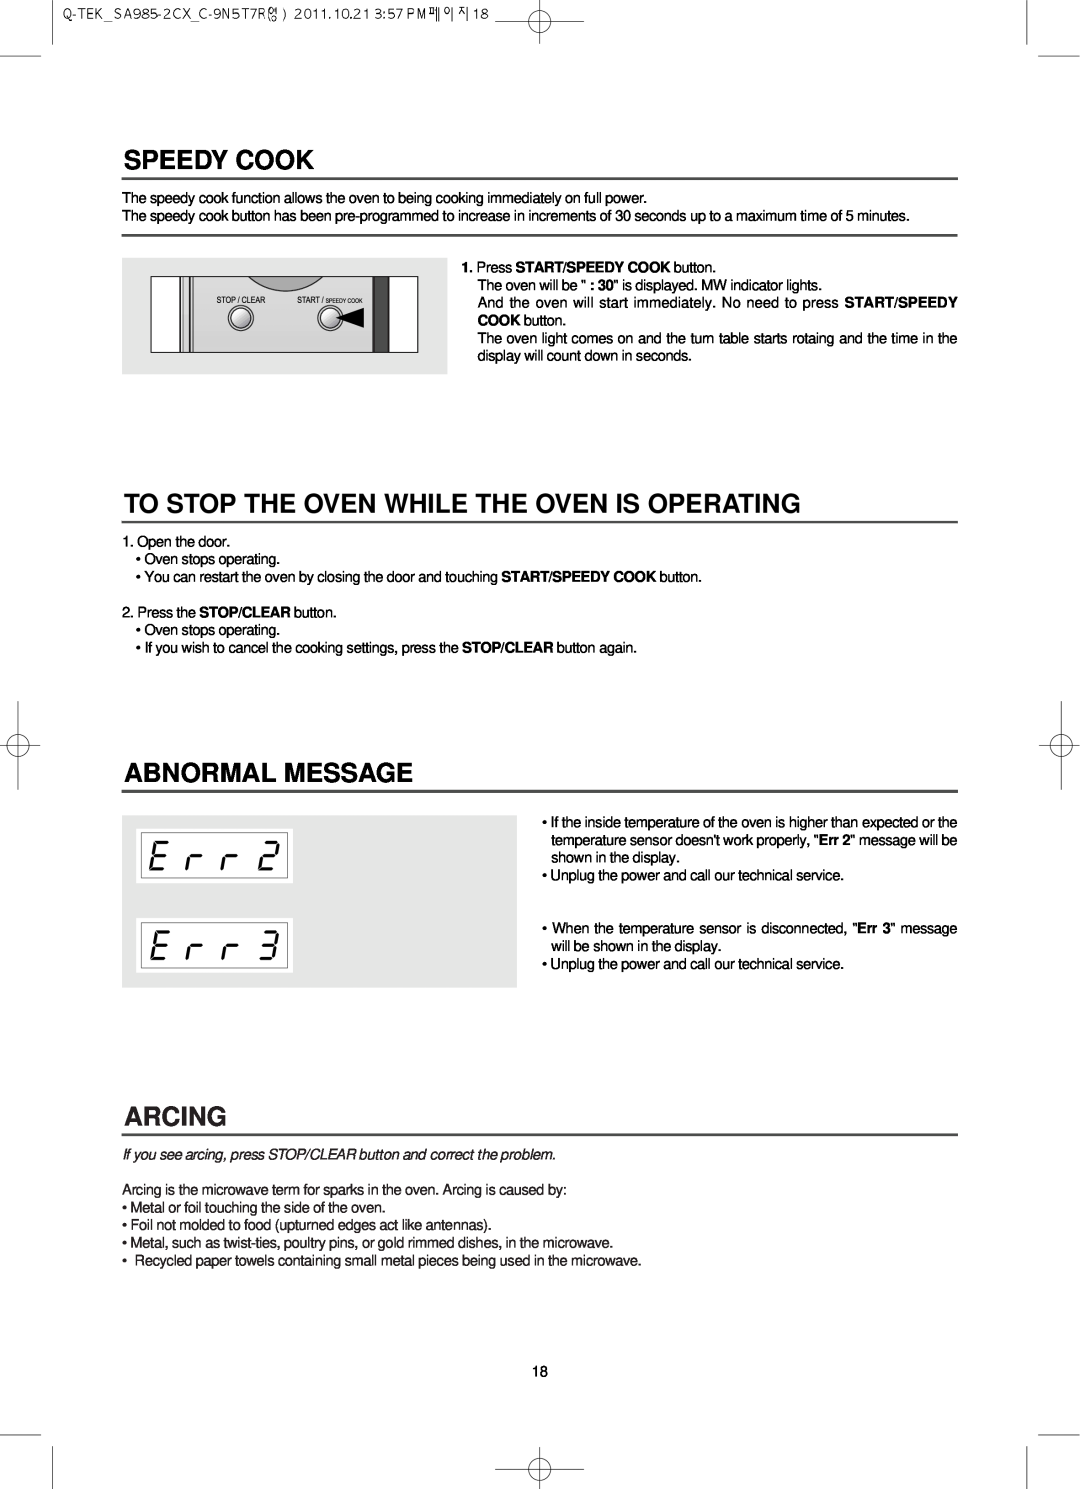 Smeg SA985-2CX owner manual Speedy Cook, To Stop The Oven While The Oven Is Operating, Abnormal Message, Arcing 